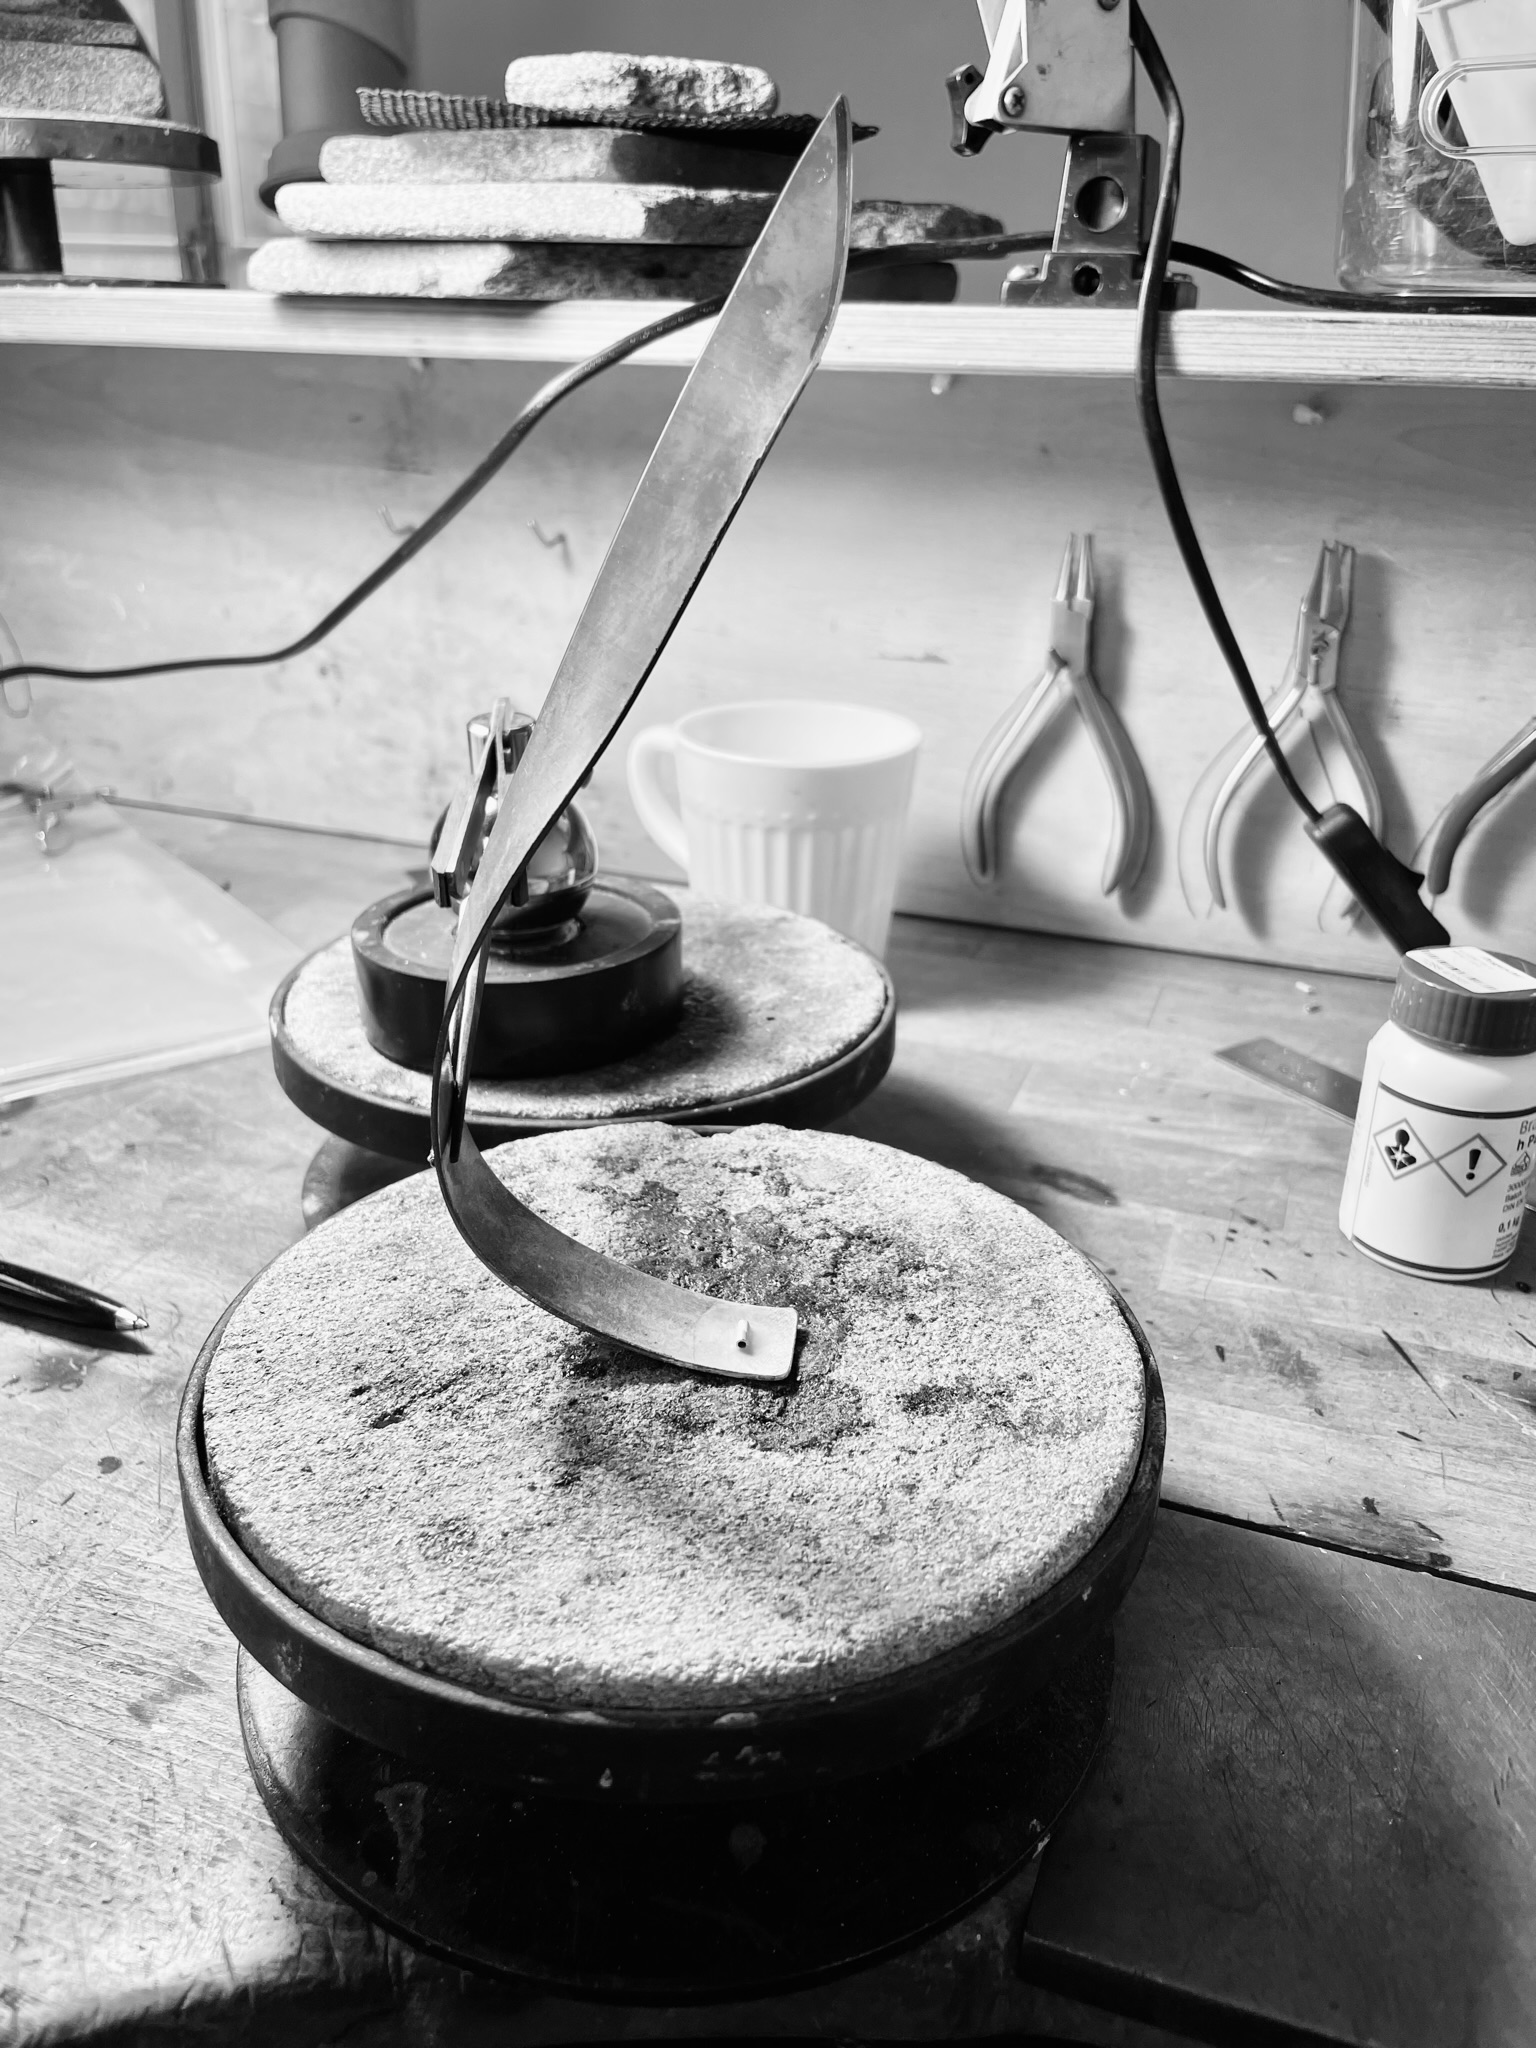 A silver necklace in the making on a silversmithing bench